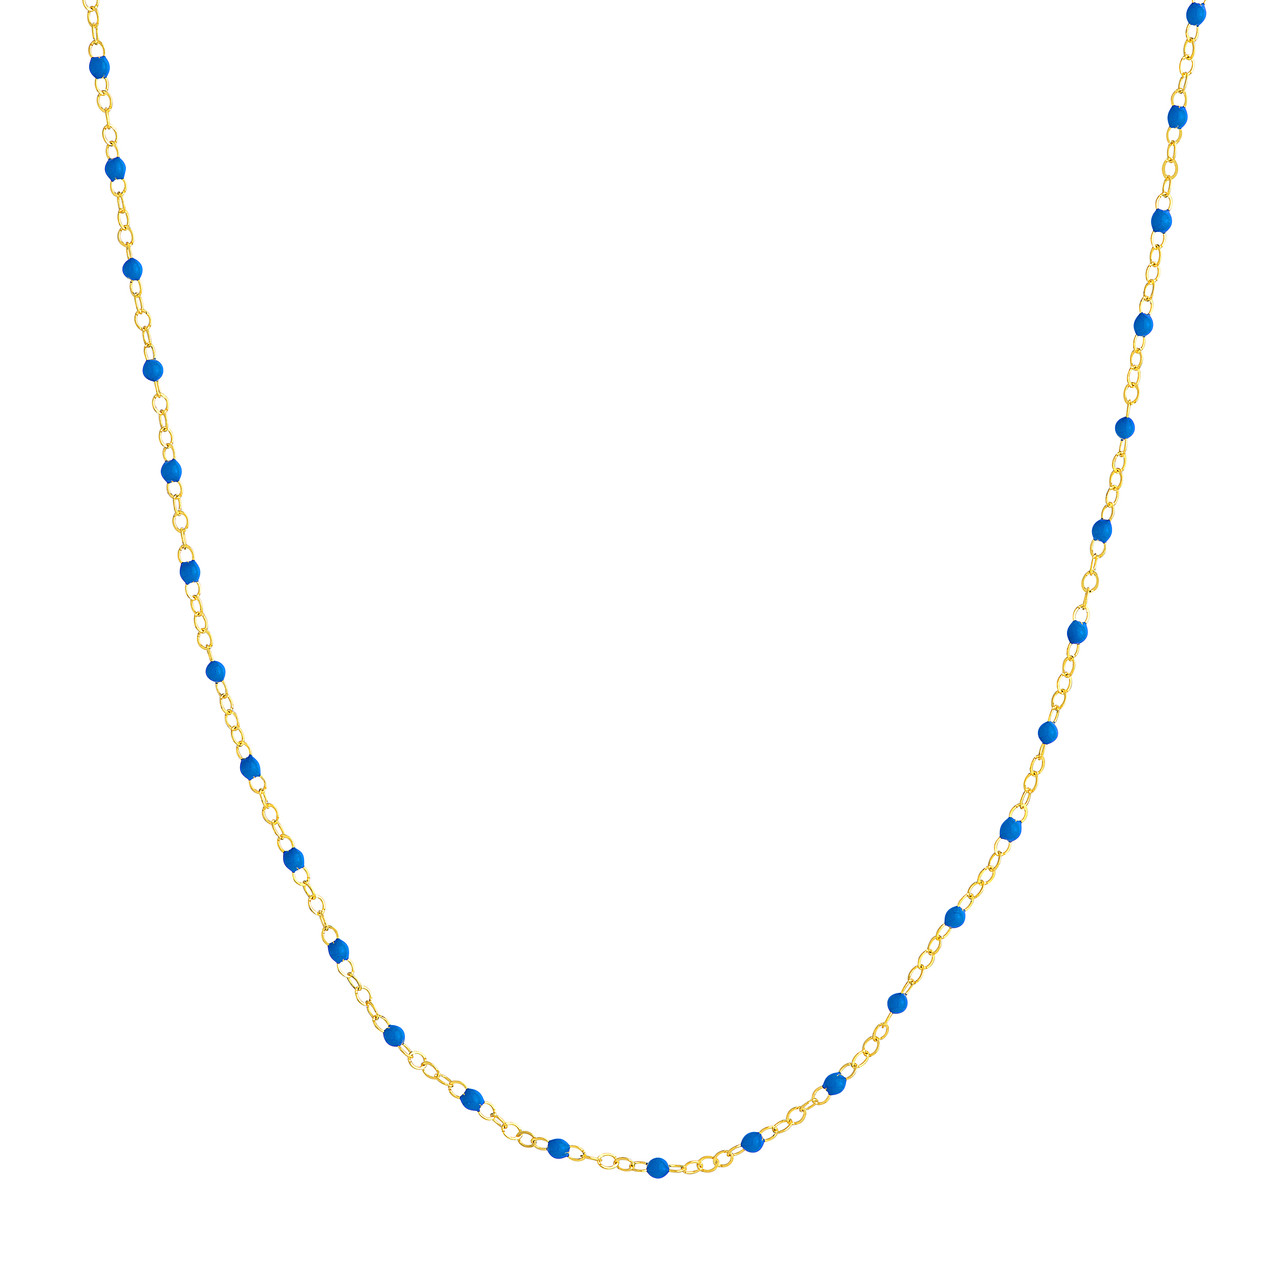 Yellow Gold Cobalt Enamel Bead Chain Necklace l 18 inches